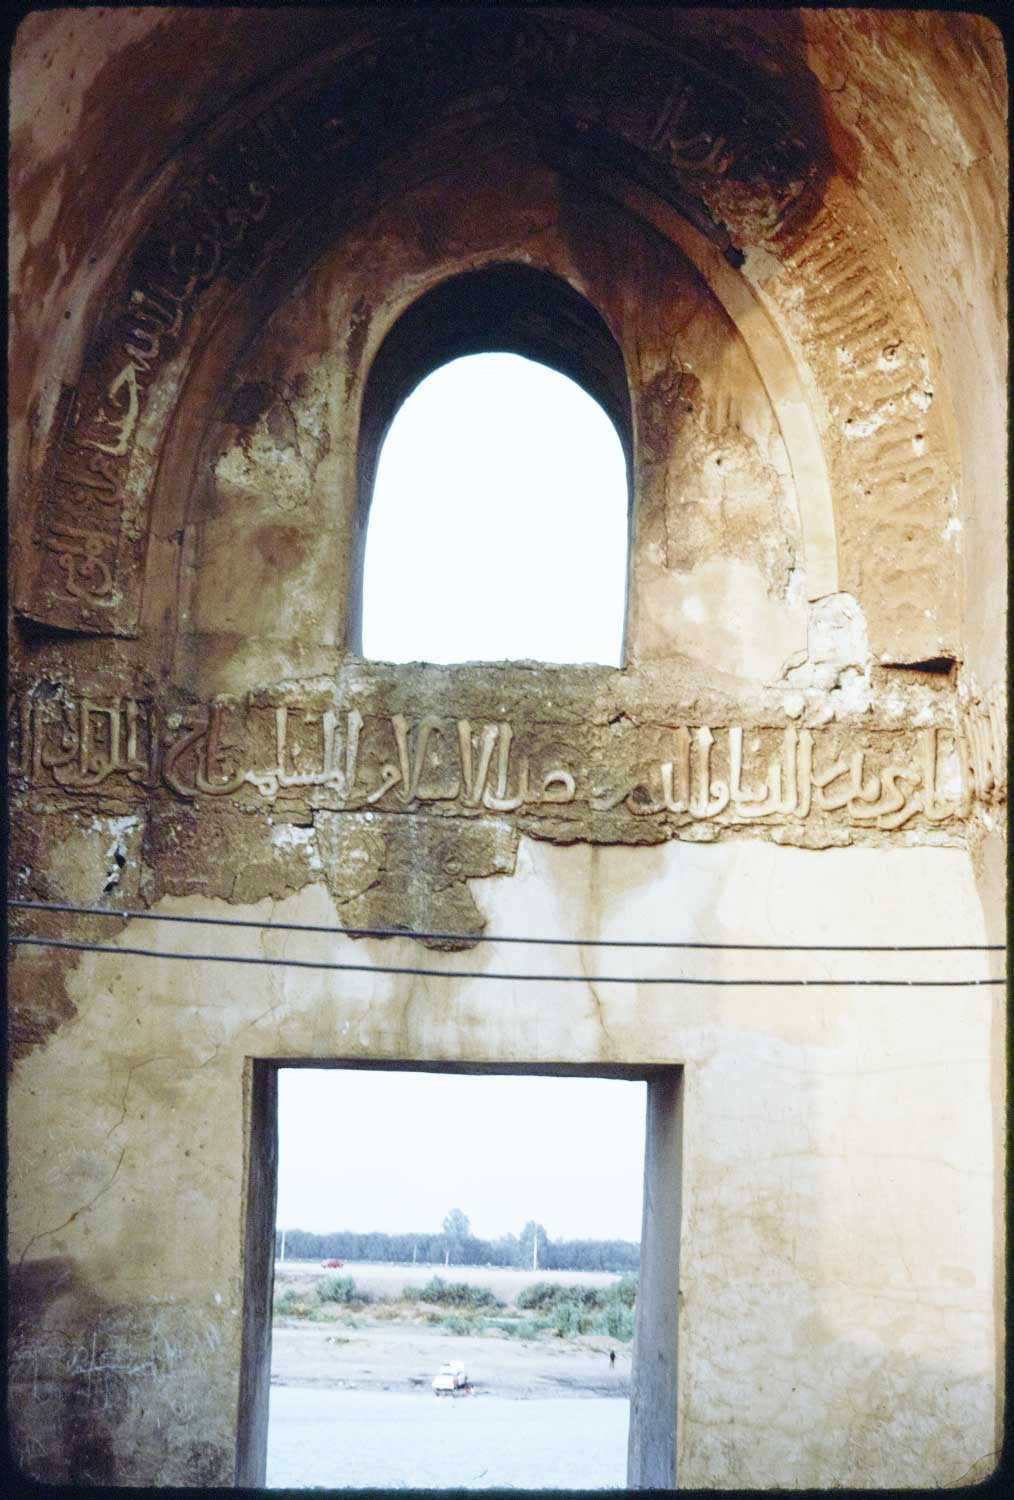 View of wall with bands of Arabic inscriptions and window overlooking Tigris.